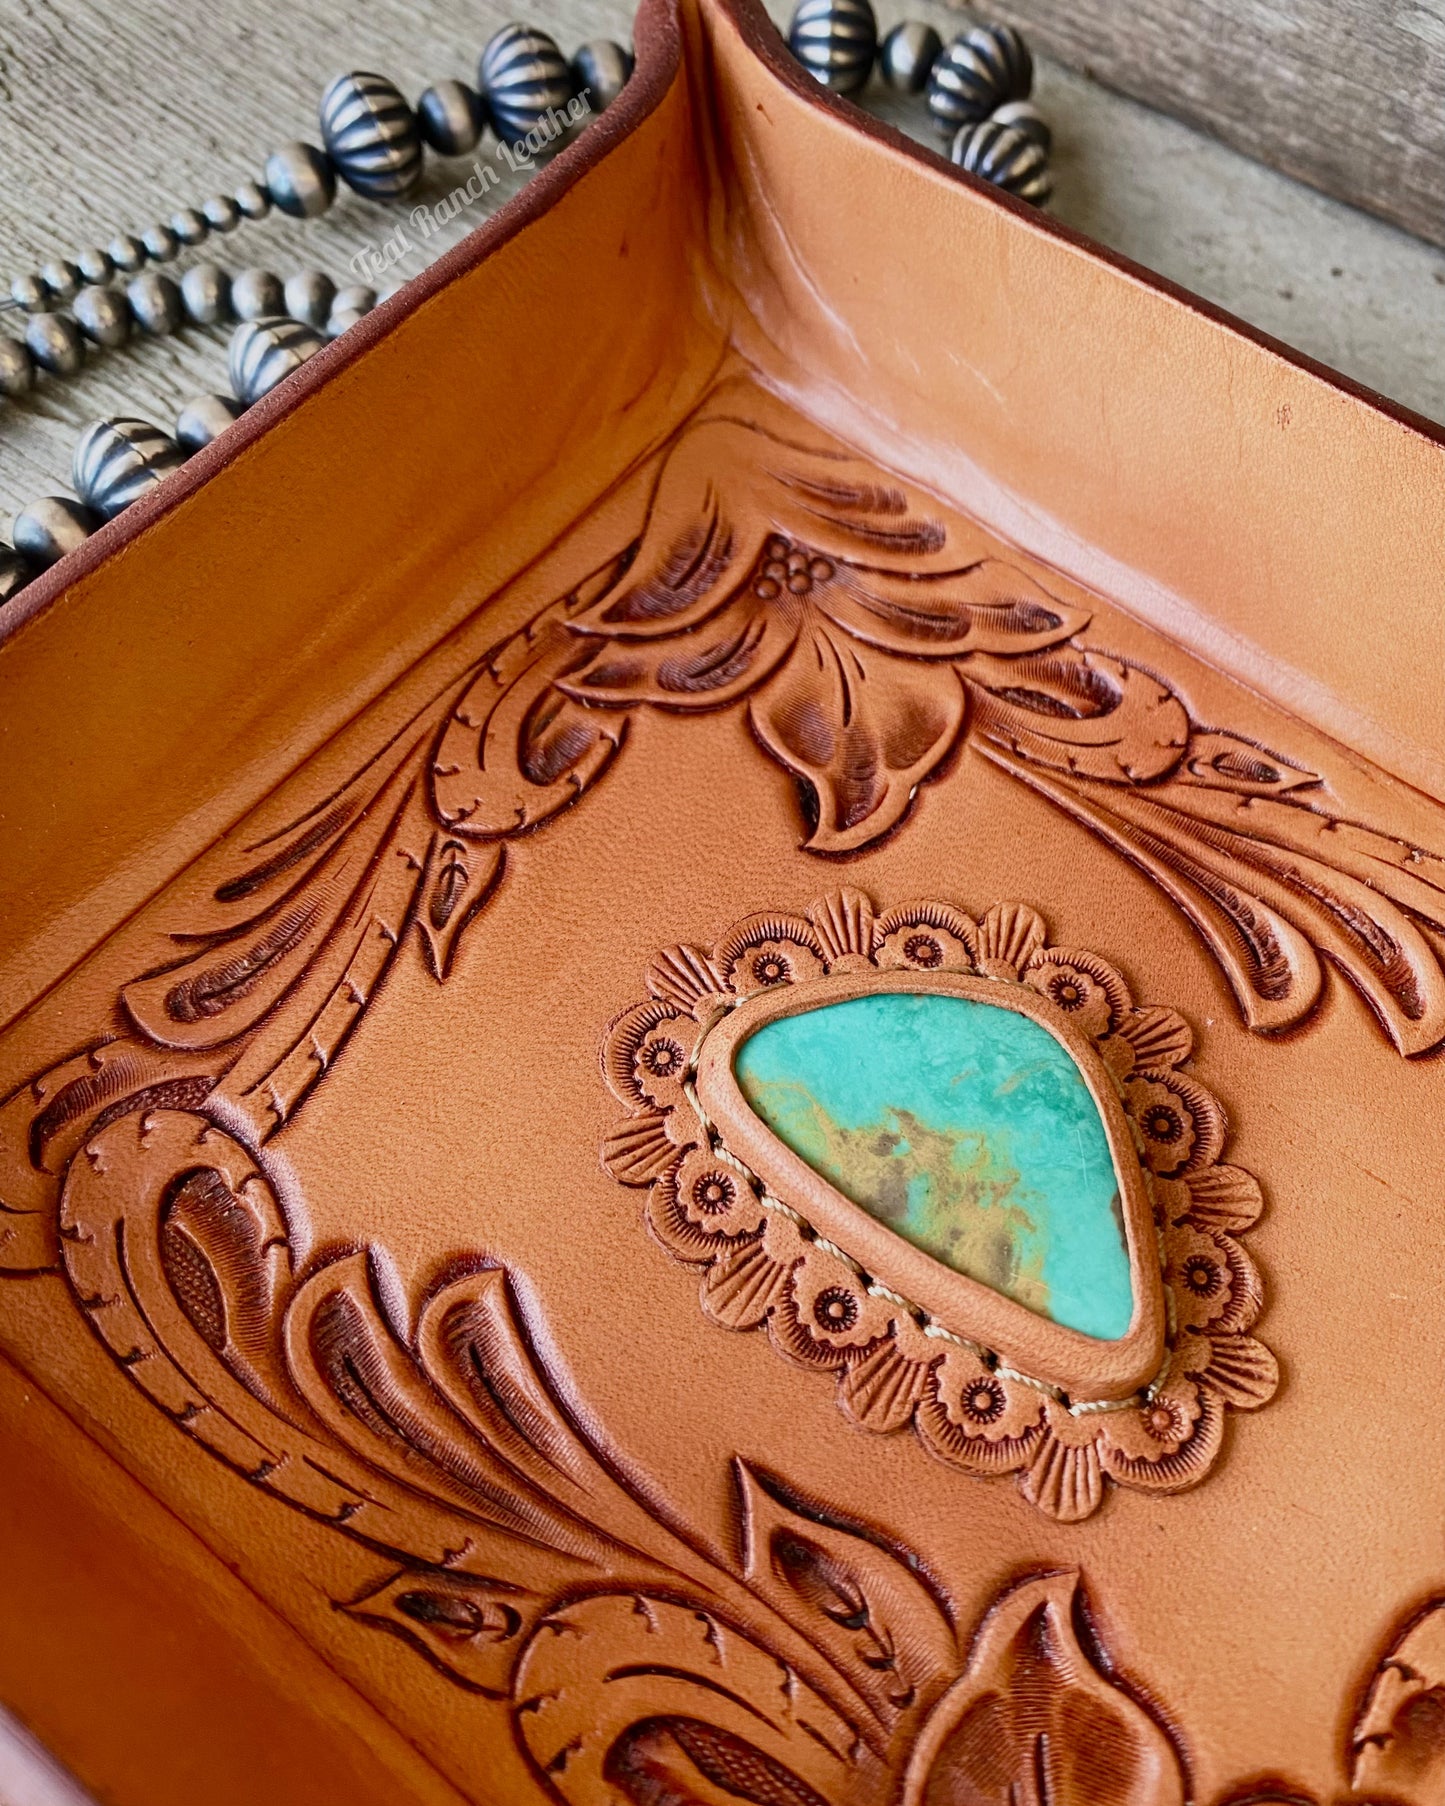 Turquoise and Leather Jewelry Bowls